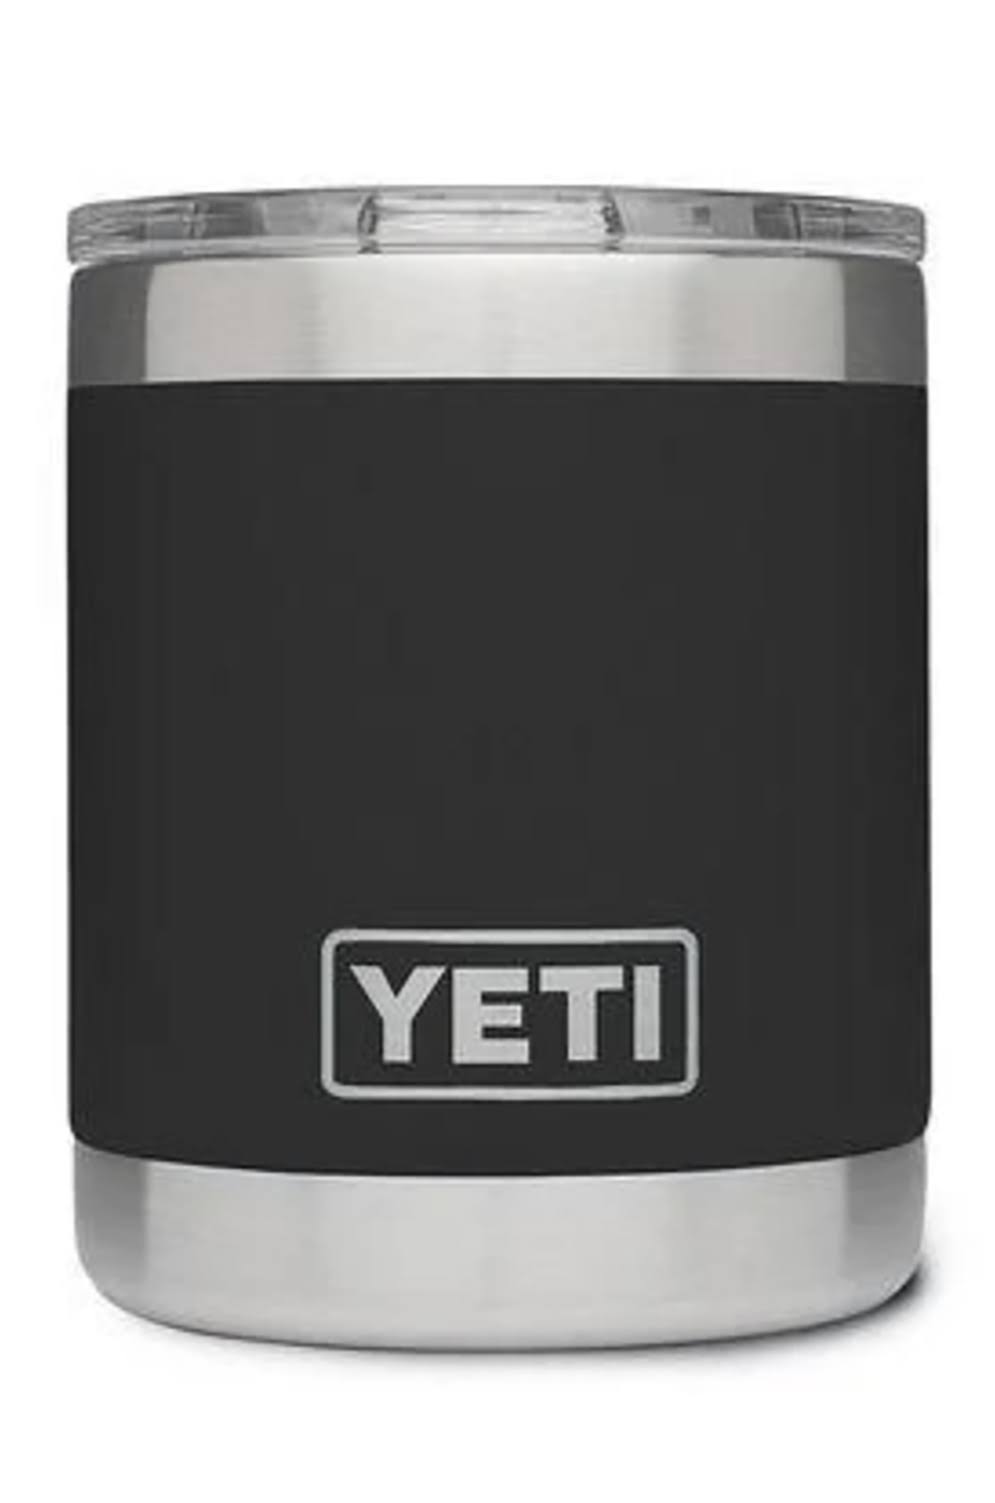 Yeti Rambler Lowball Insulated Stainless Steel Tumbler with Lid - 10oz